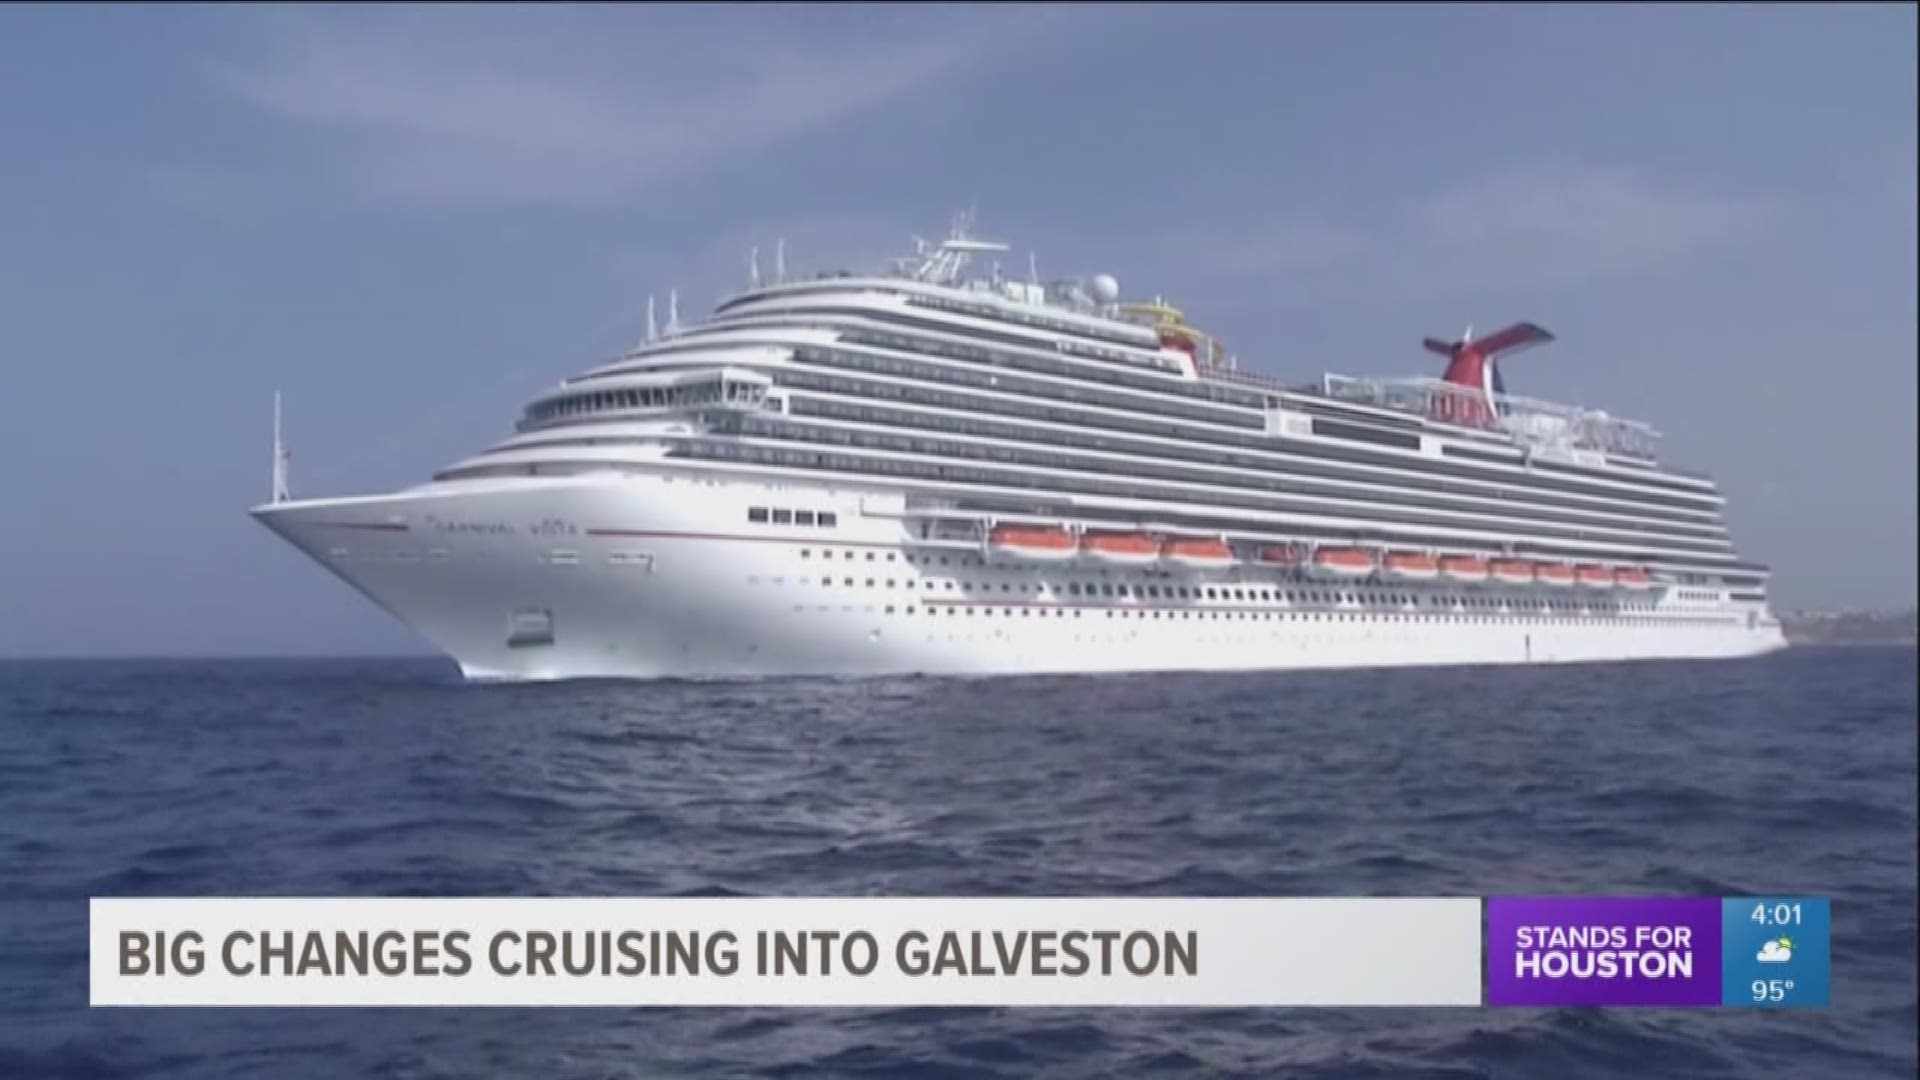 The Port of Galveston recently completed improvements at Cruise Terminal No. 1 in anticipation of Carnival Cruise Line's newest and biggest ship. The Carnival Vista, a 1,055-foot vessel, will move to Galveston on Sept. 23, replacing Carnival Breeze.